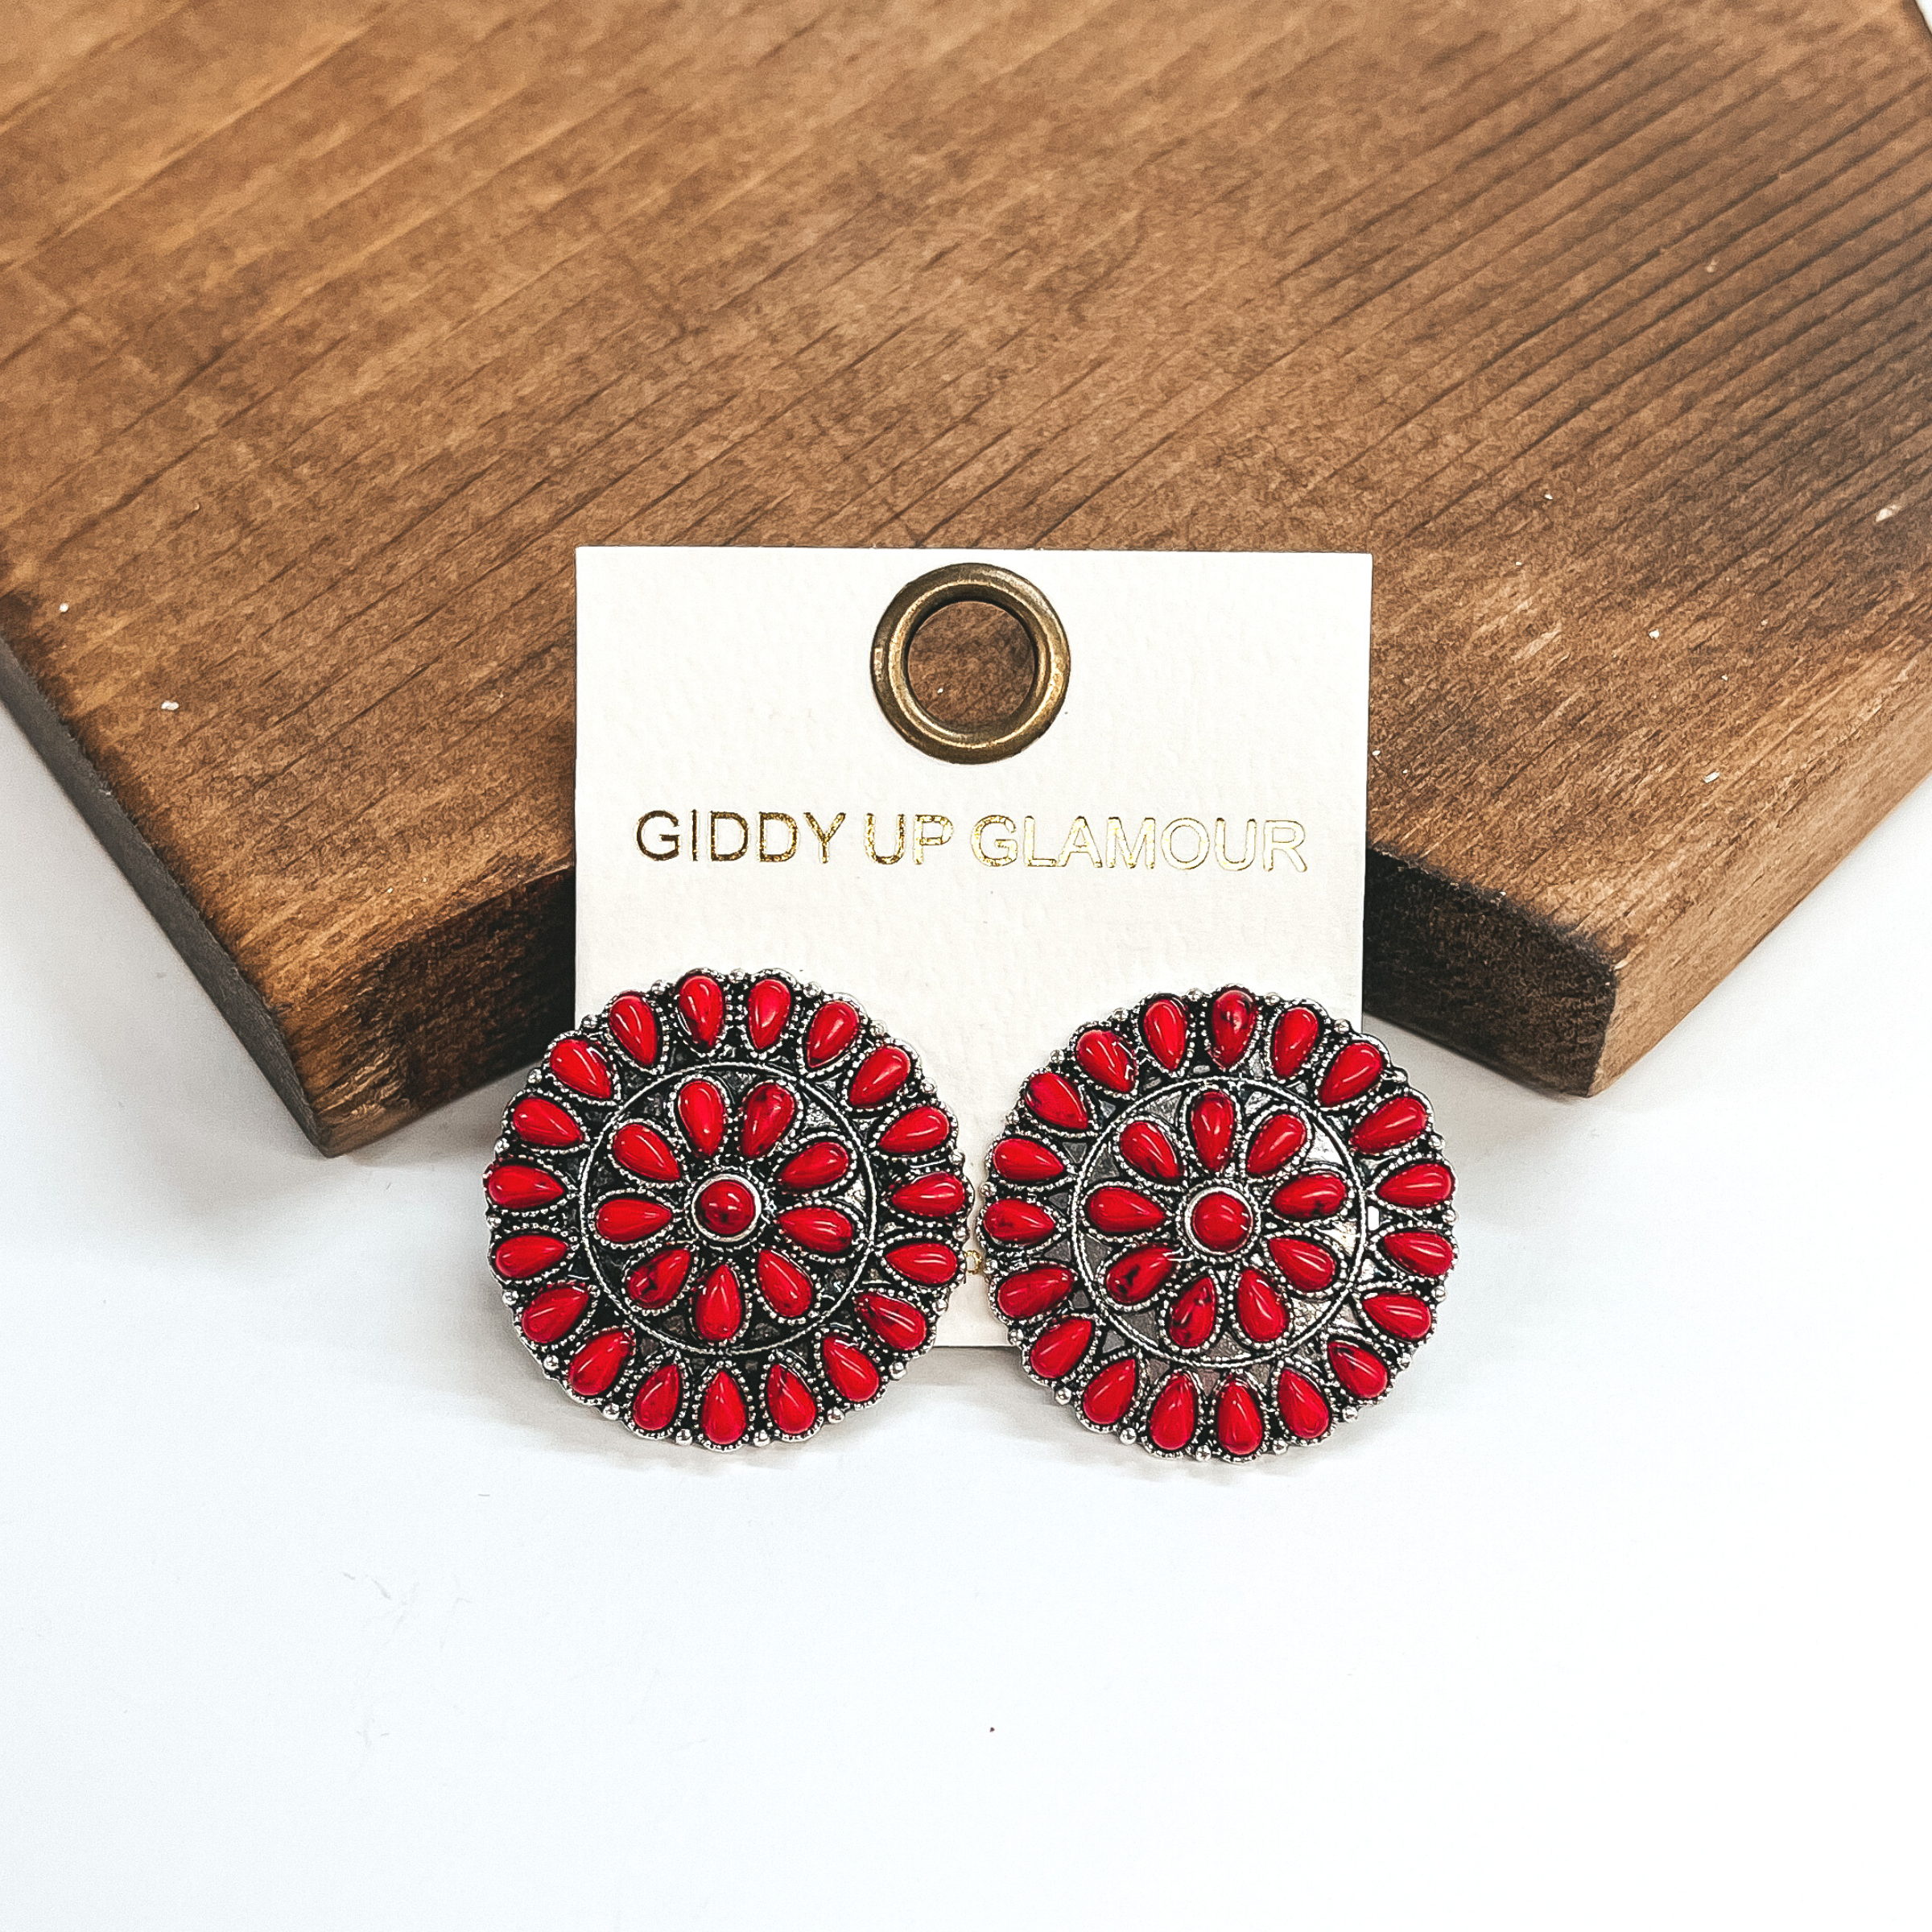 These are silver circle post back earrings with  small red stones in a cluster. These earrings are  taken on a white background and leaning up  against a brown block.